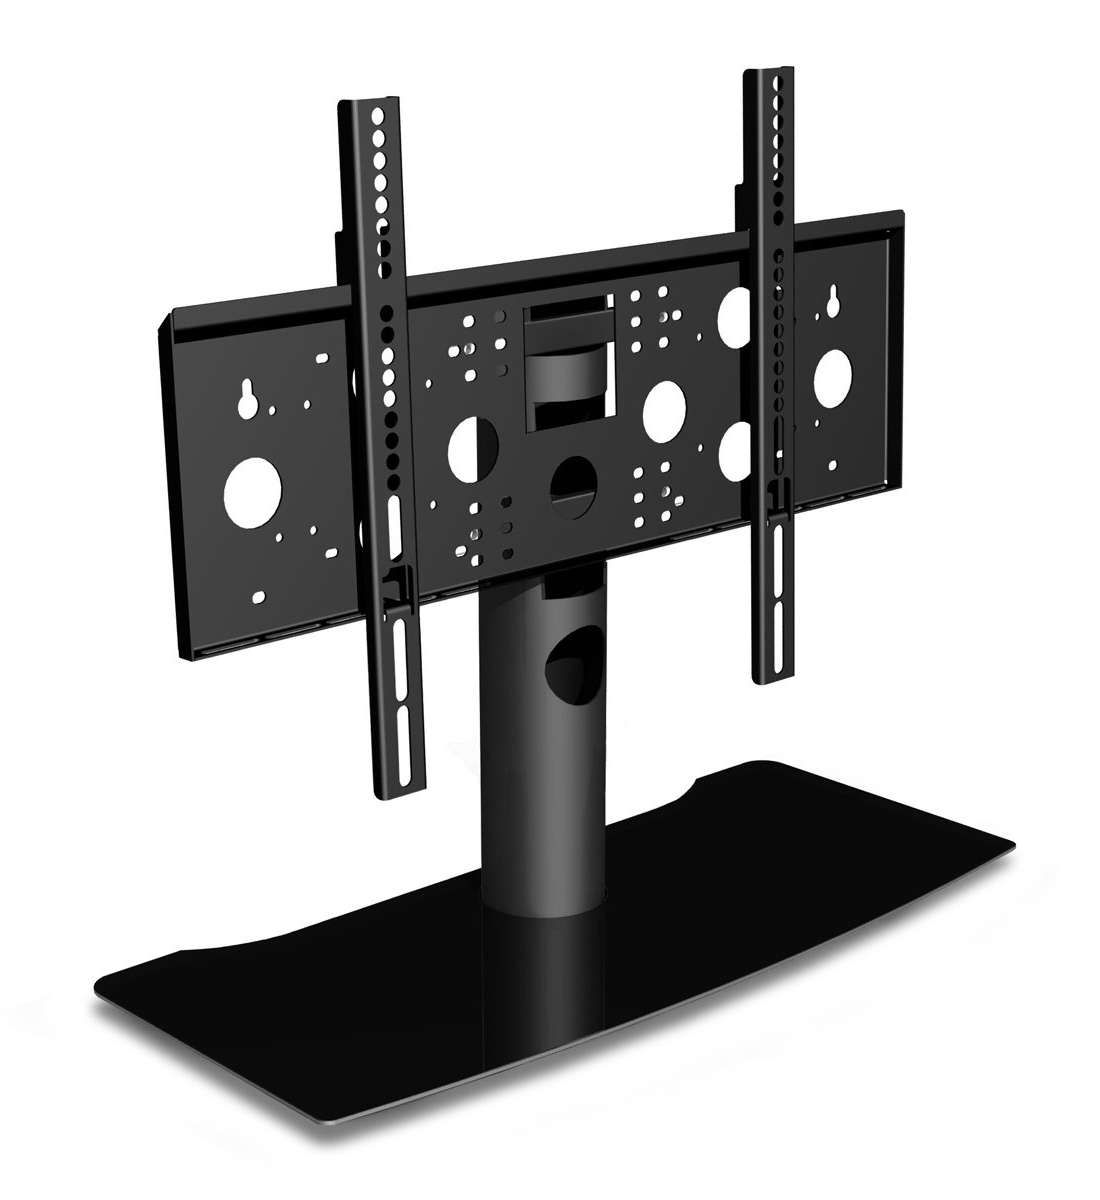 Table Top Stands | Replacement Tv Base | Pedestal Stand Inside Tabletop Tv Stands (View 7 of 15)